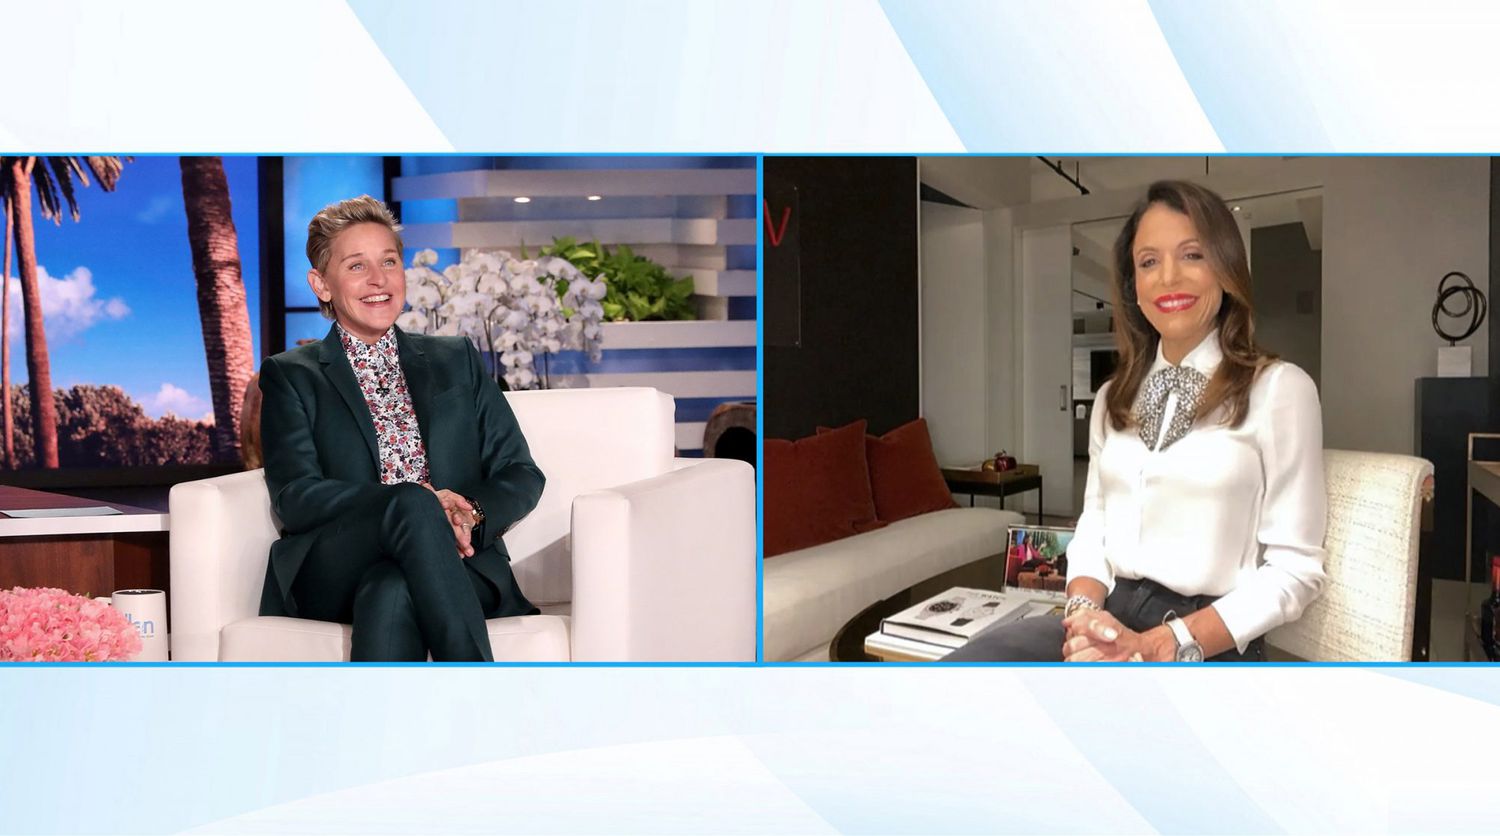 Reality star-turned-business mogul Bethenny Frankel makes an appearance on &ldquo;The Ellen DeGeneres Show&rdquo; via Zoom airing Friday, October 23rd.